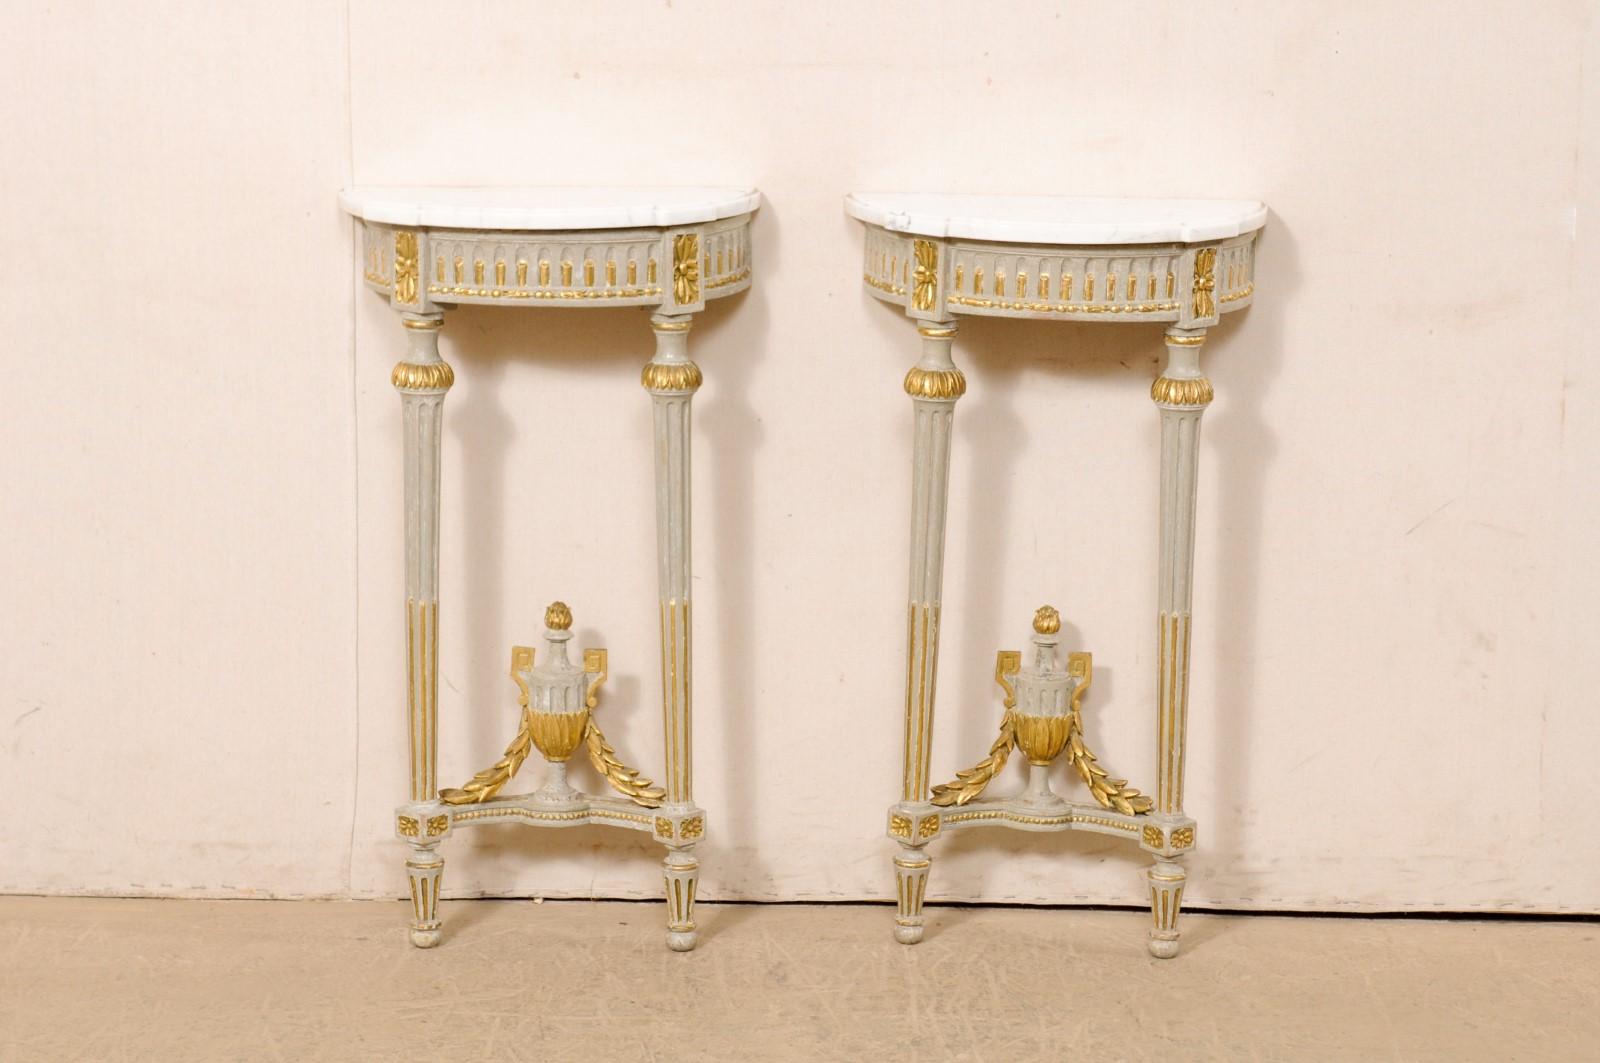 A petite pair of French Neoclassical wall consoles, with their original marble and finish, from the early 19th century. This Period Neoclassical pair of tables from France each feature a white marble, half-moon/demi shaped top, with rectangular